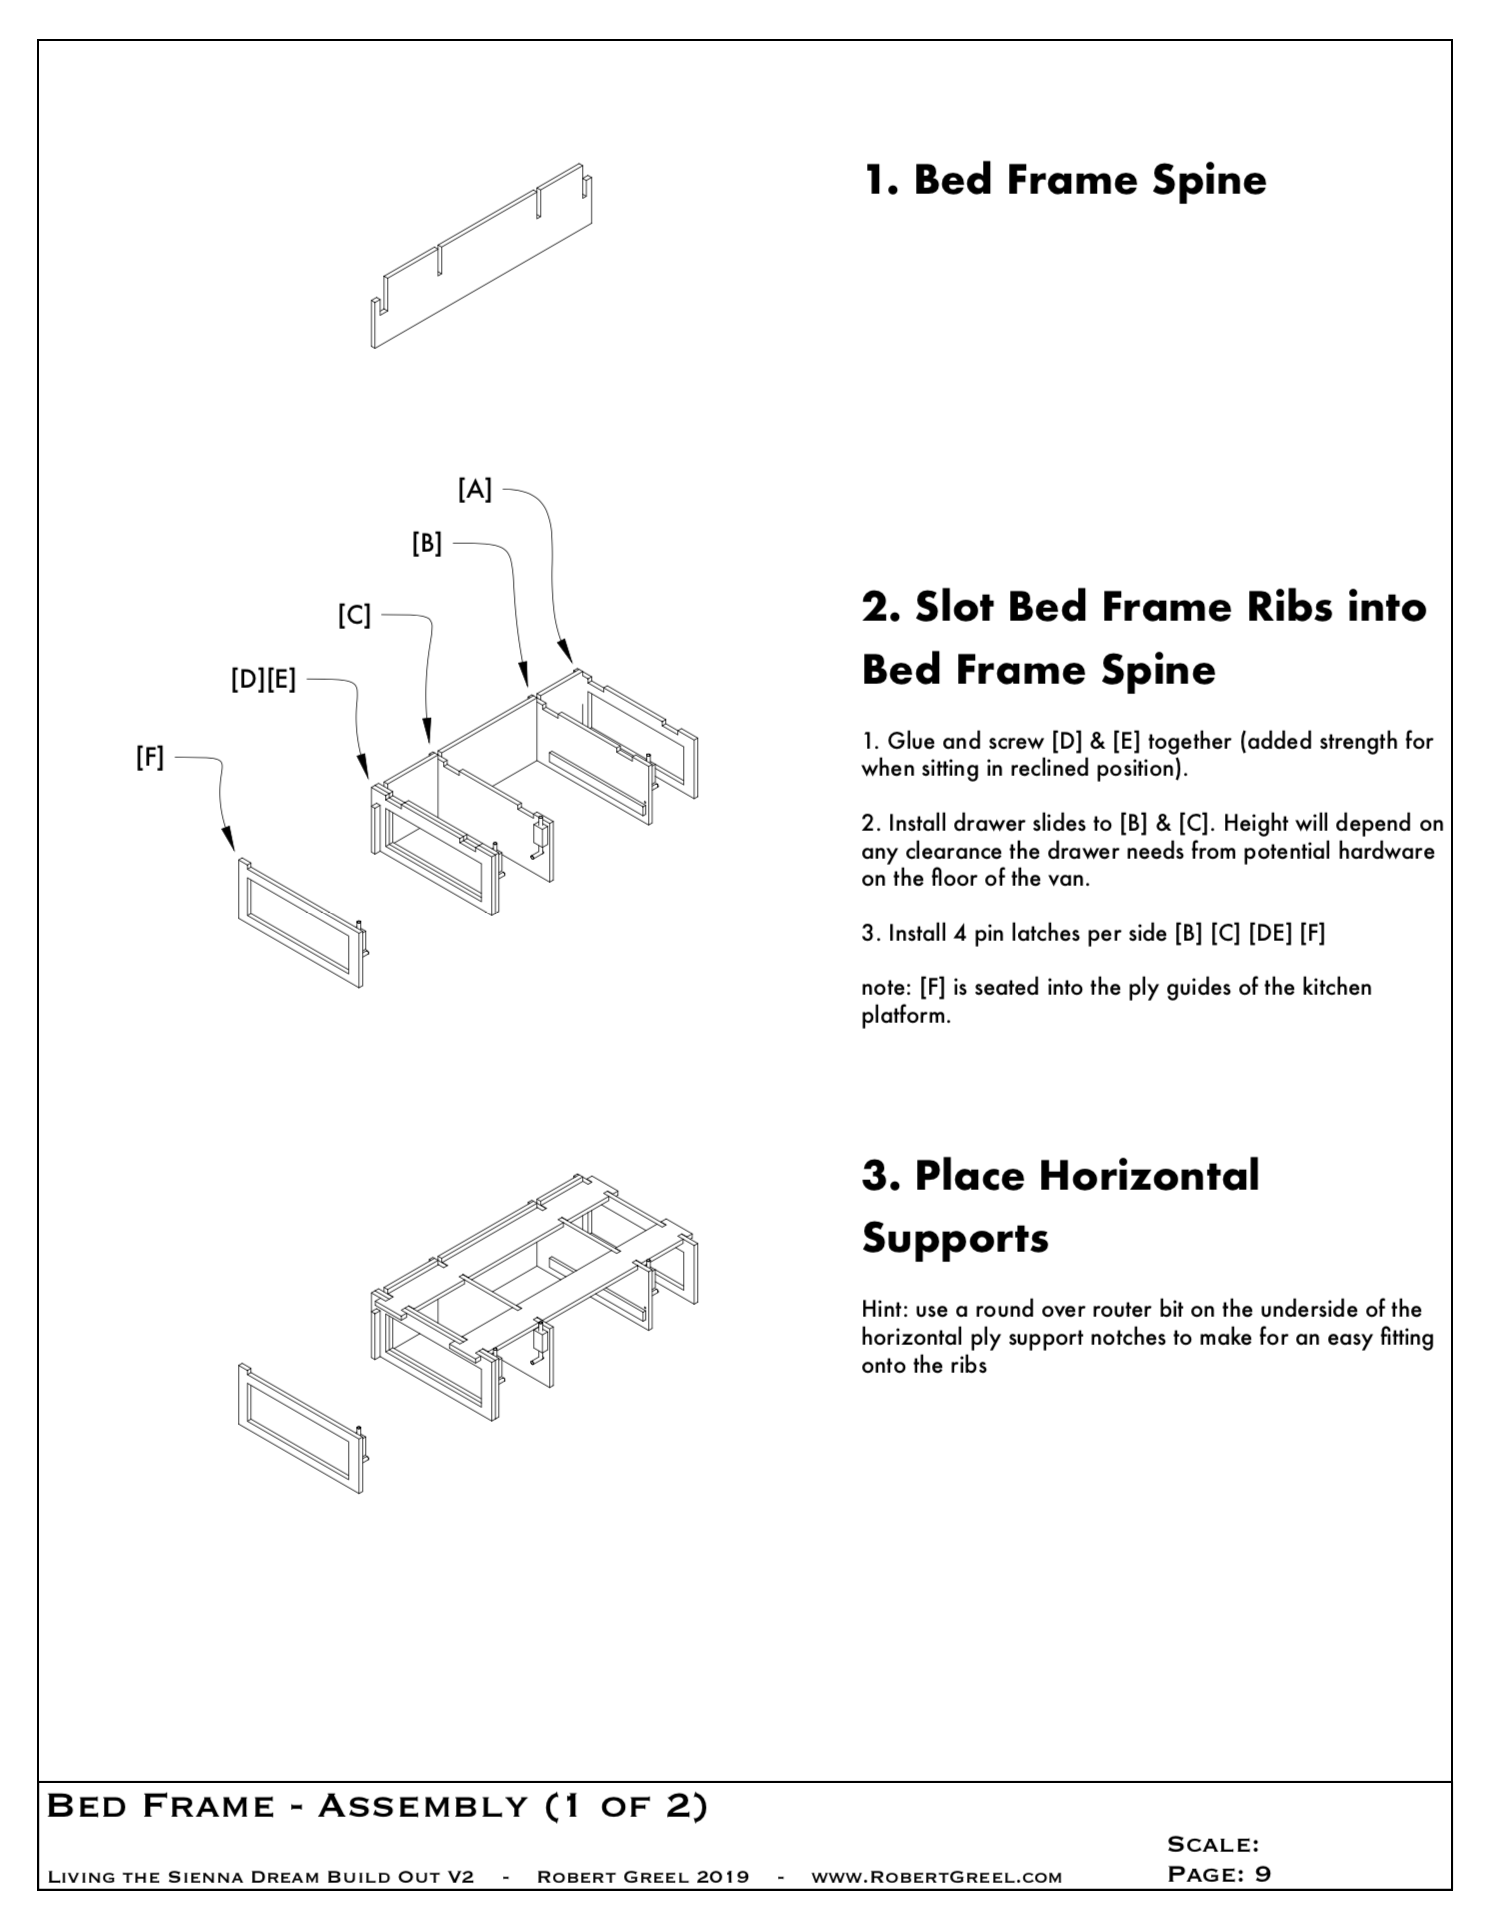 bed frame assembly.png